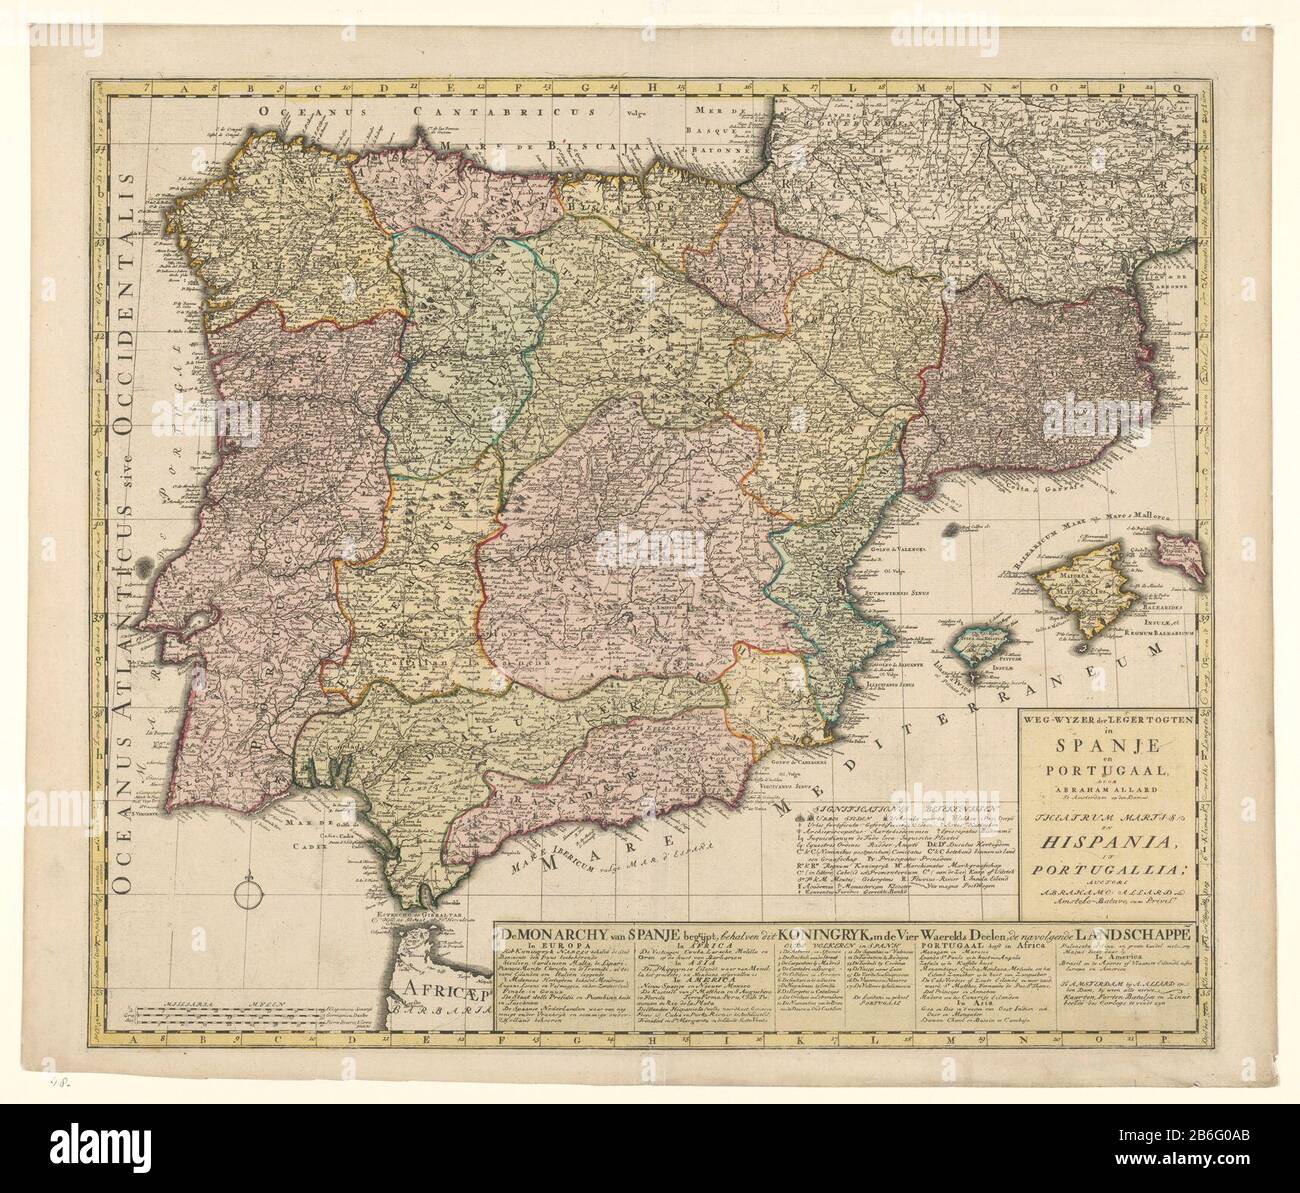 Cartography in the Netherlands, map of Spain and Portugal Map of Spain and Portugal, areas colored yellow border. R.o. legend, M.O. to r.o. Text (enumeration in six columns Where: Also included in Portugal's possessions). L. O. compass and scale in Spanish and German leagues miles and hours. Inscriptions; R.O .: -way-POINTER of LEGERTOGTEN / SPAIN / and / PORTUGAL - THEA TRE MARTIS / IN / HISPANIA / ET / PORTUGALIA. signed; R.O .: By ABRAHAM ALLARD / Auctore Abrahamo ALLARD. Manufacturer : cartographer: Abraham Allard Place manufacture: Amsterdam Date: 1675 - 1725 Material: paper Technique: en Stock Photo